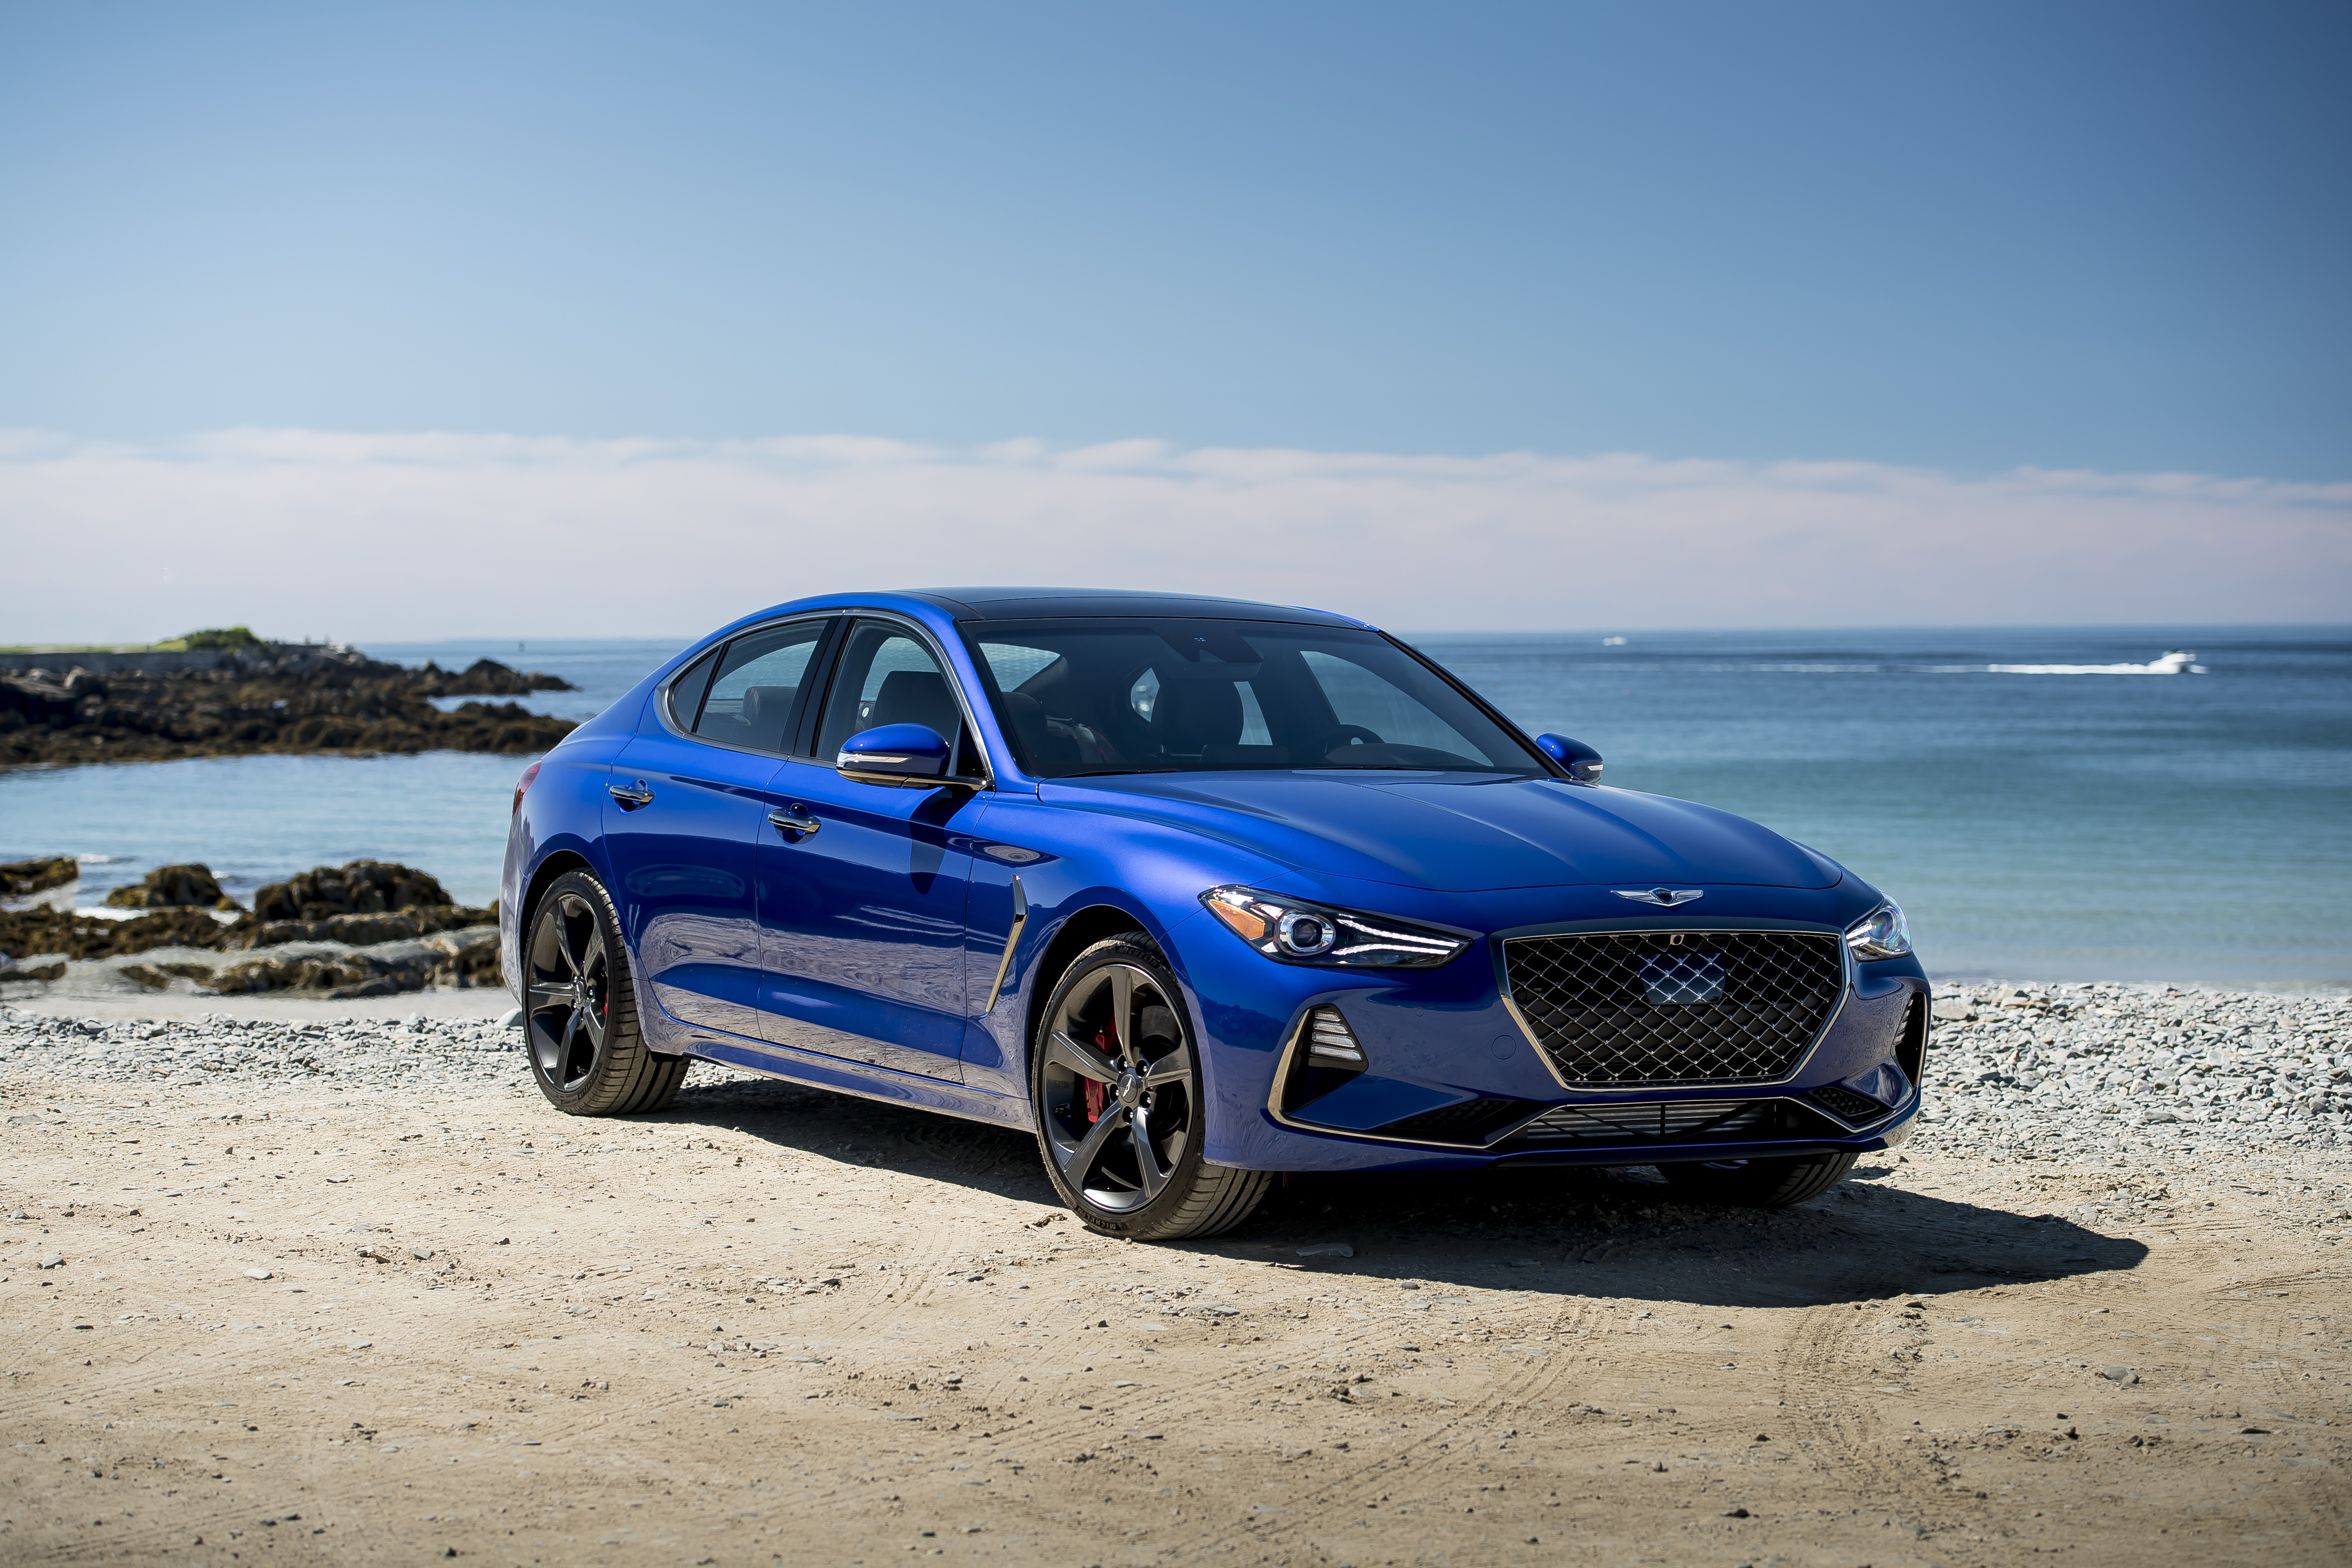 The new Genesis G70, a blend of elegance and sprint